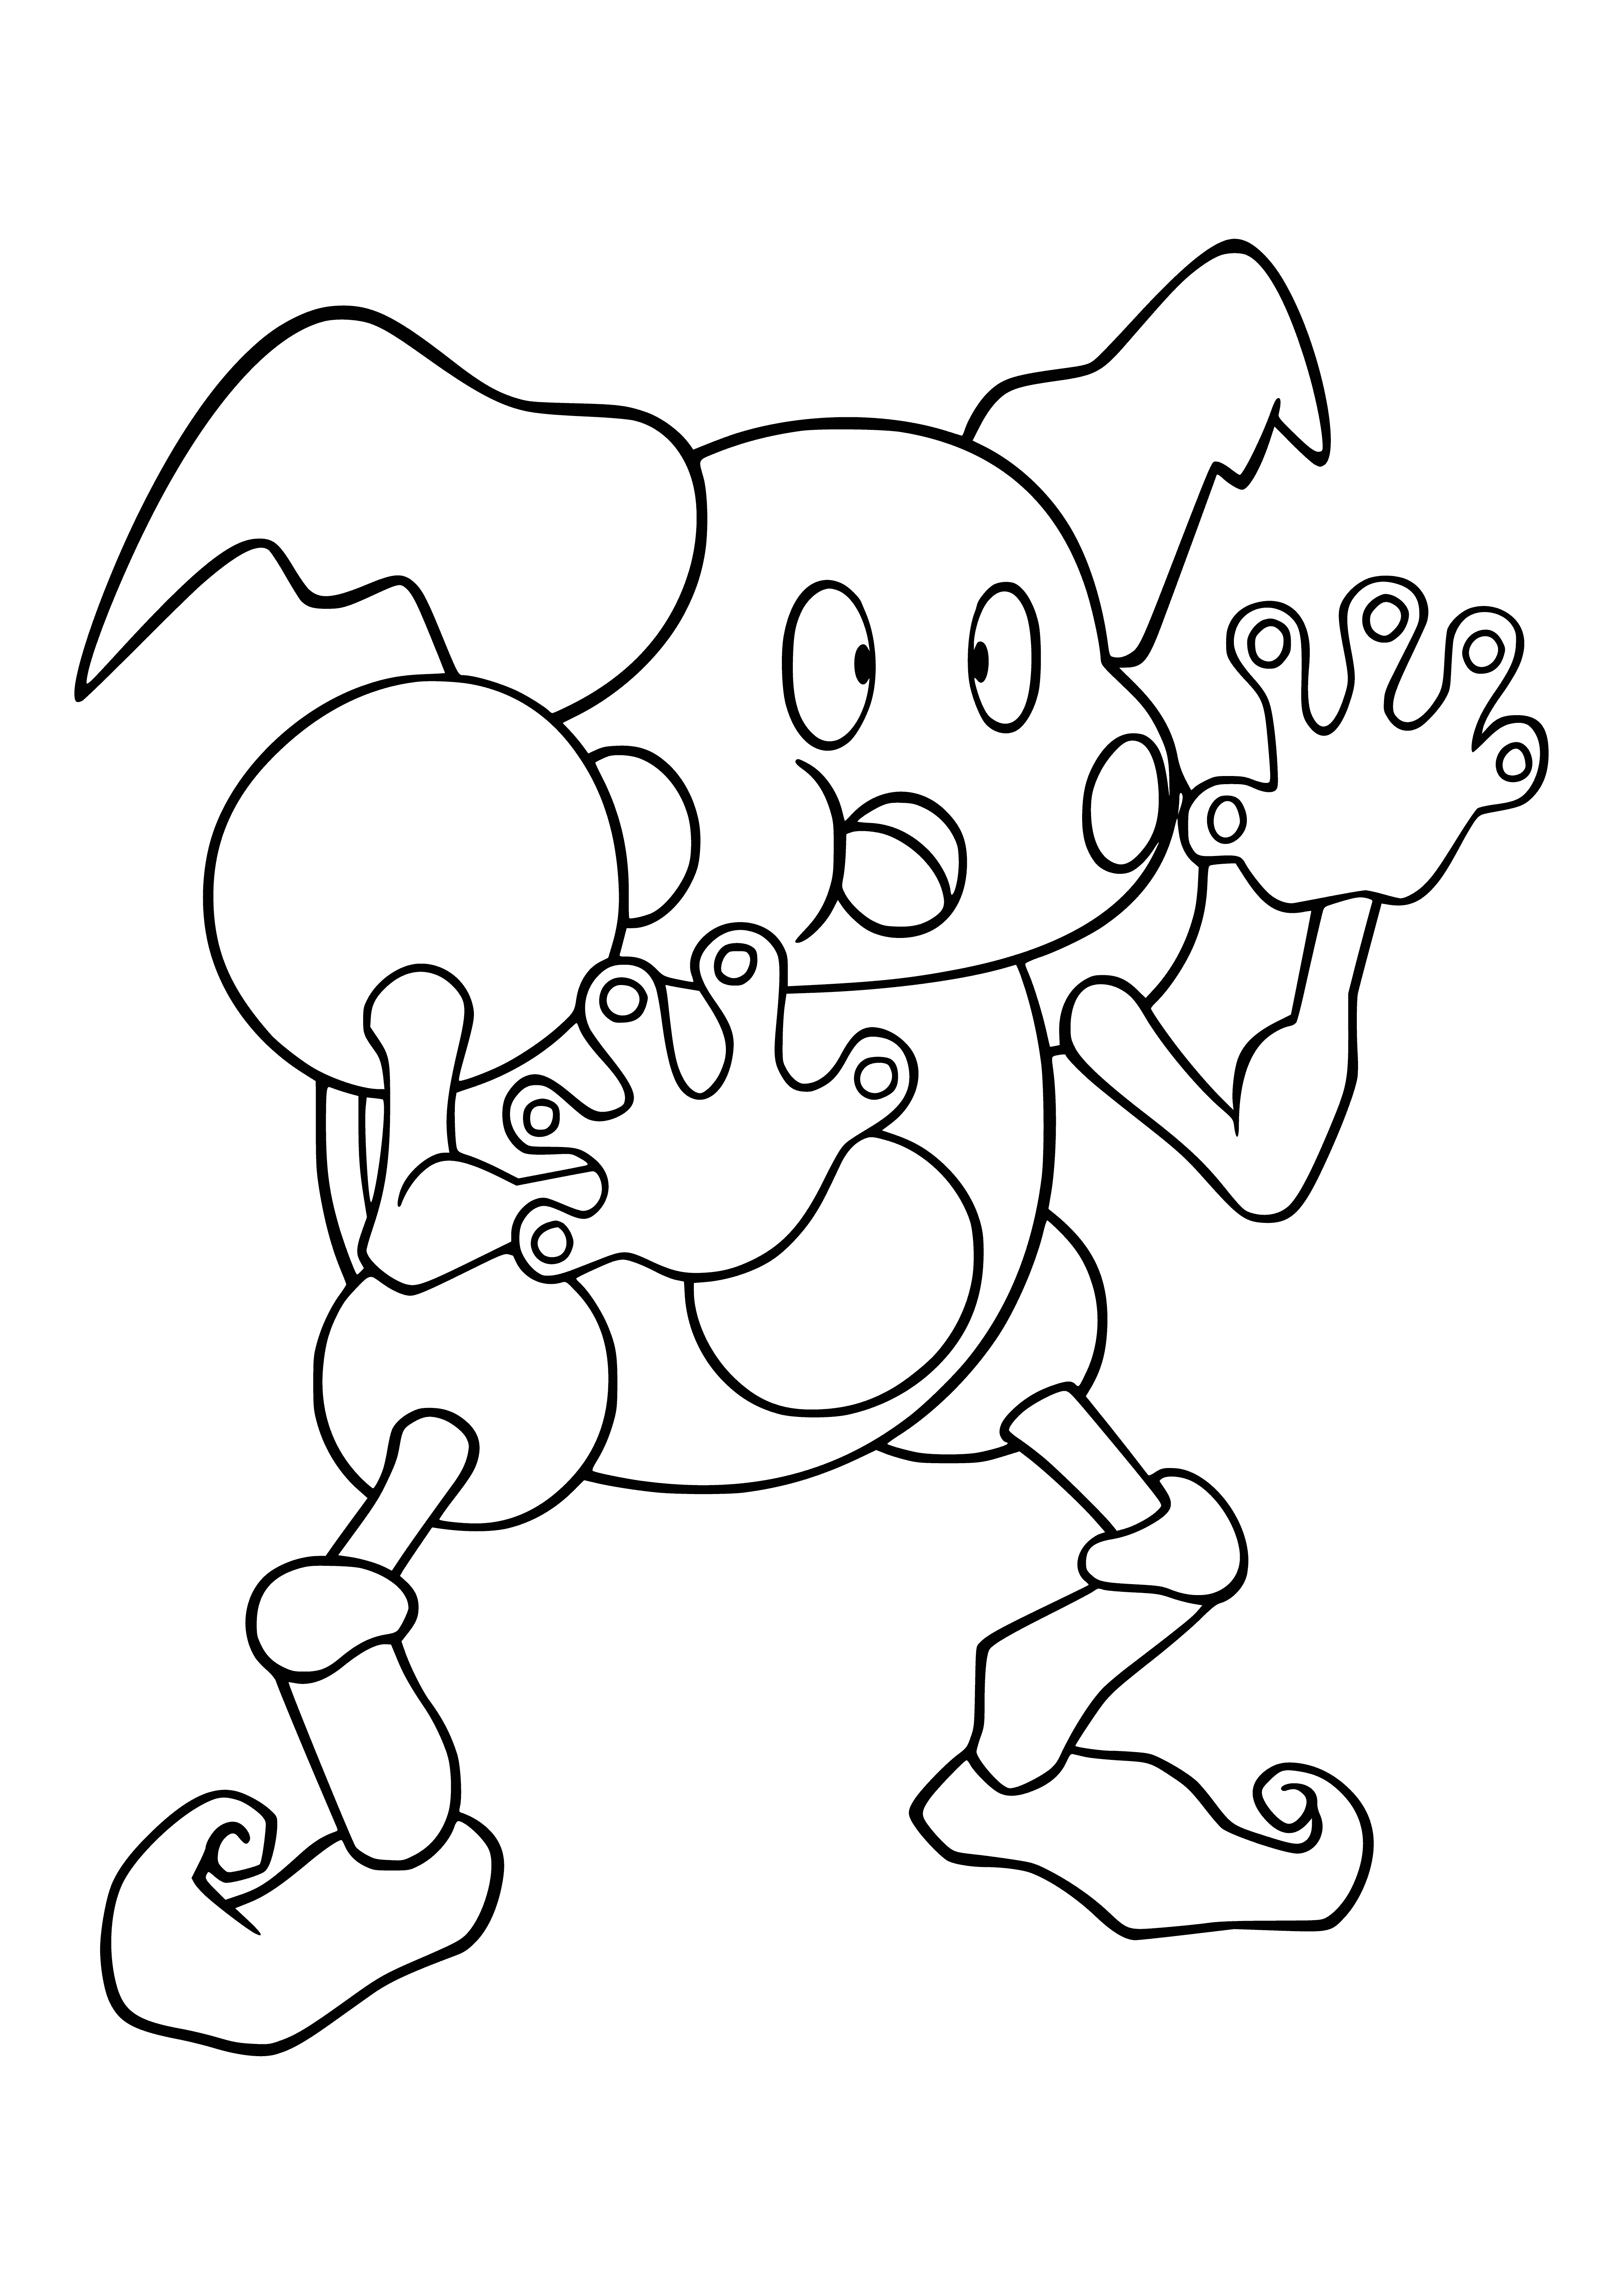 coloring page: A Psychic & Fairy-type Pokémon,Mister Mime starts its evolution from Mime Jr. Its body is white w/ black hands, feet & face, red eyes & lips, white cheeks & spots, & a black tail w/ white tip.